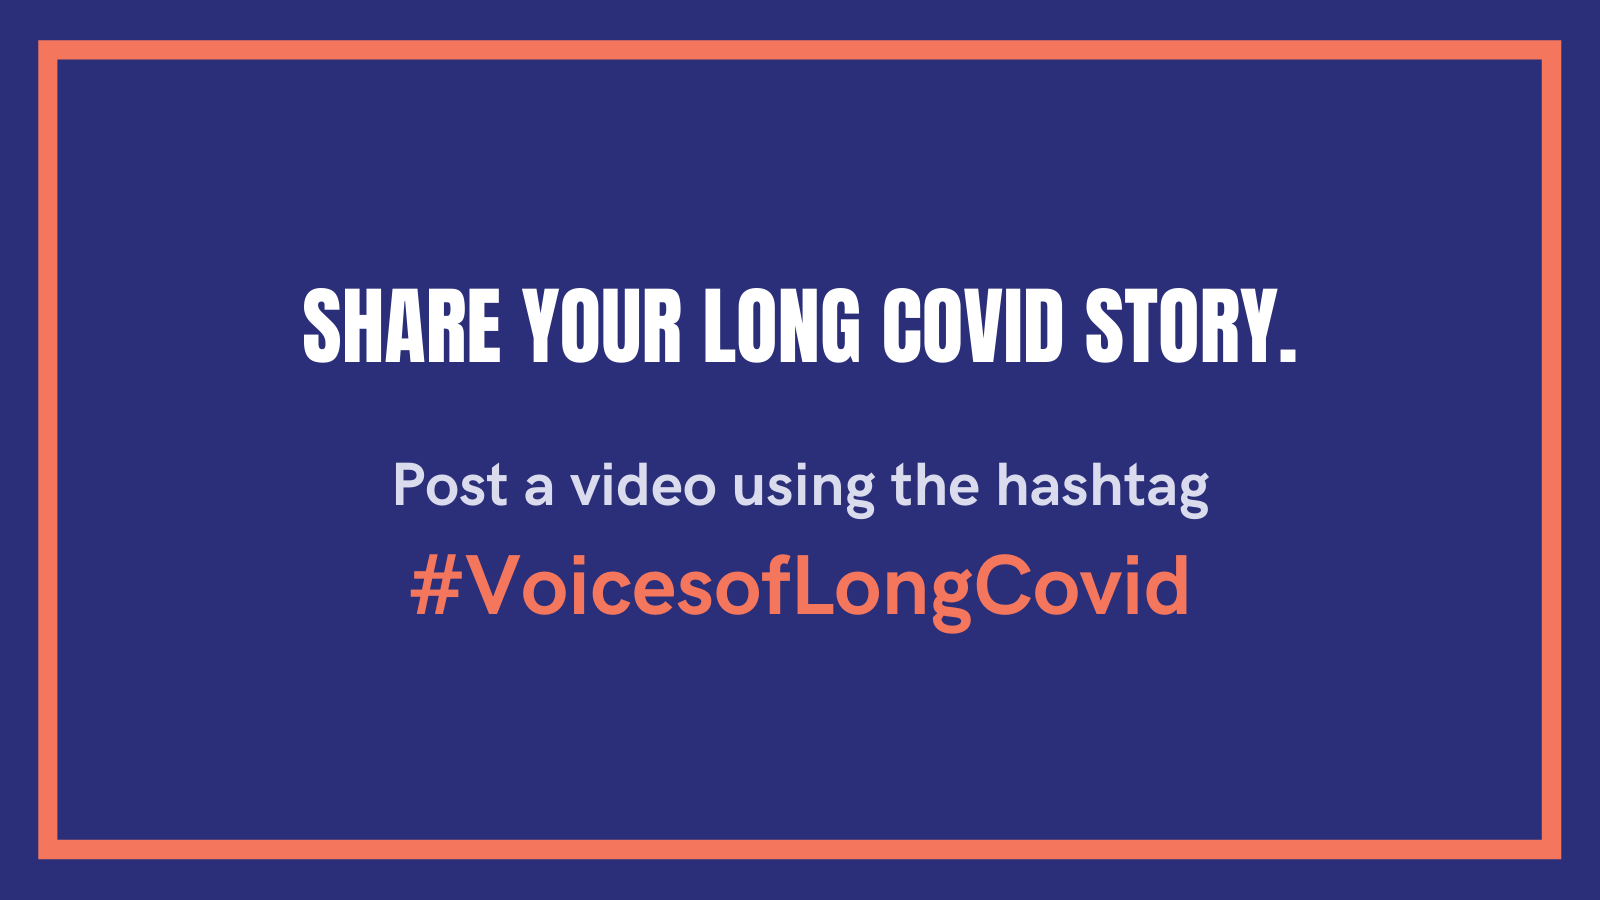 Share your long COVID story. Post a video using the hashtag #VoicesofLongCovid